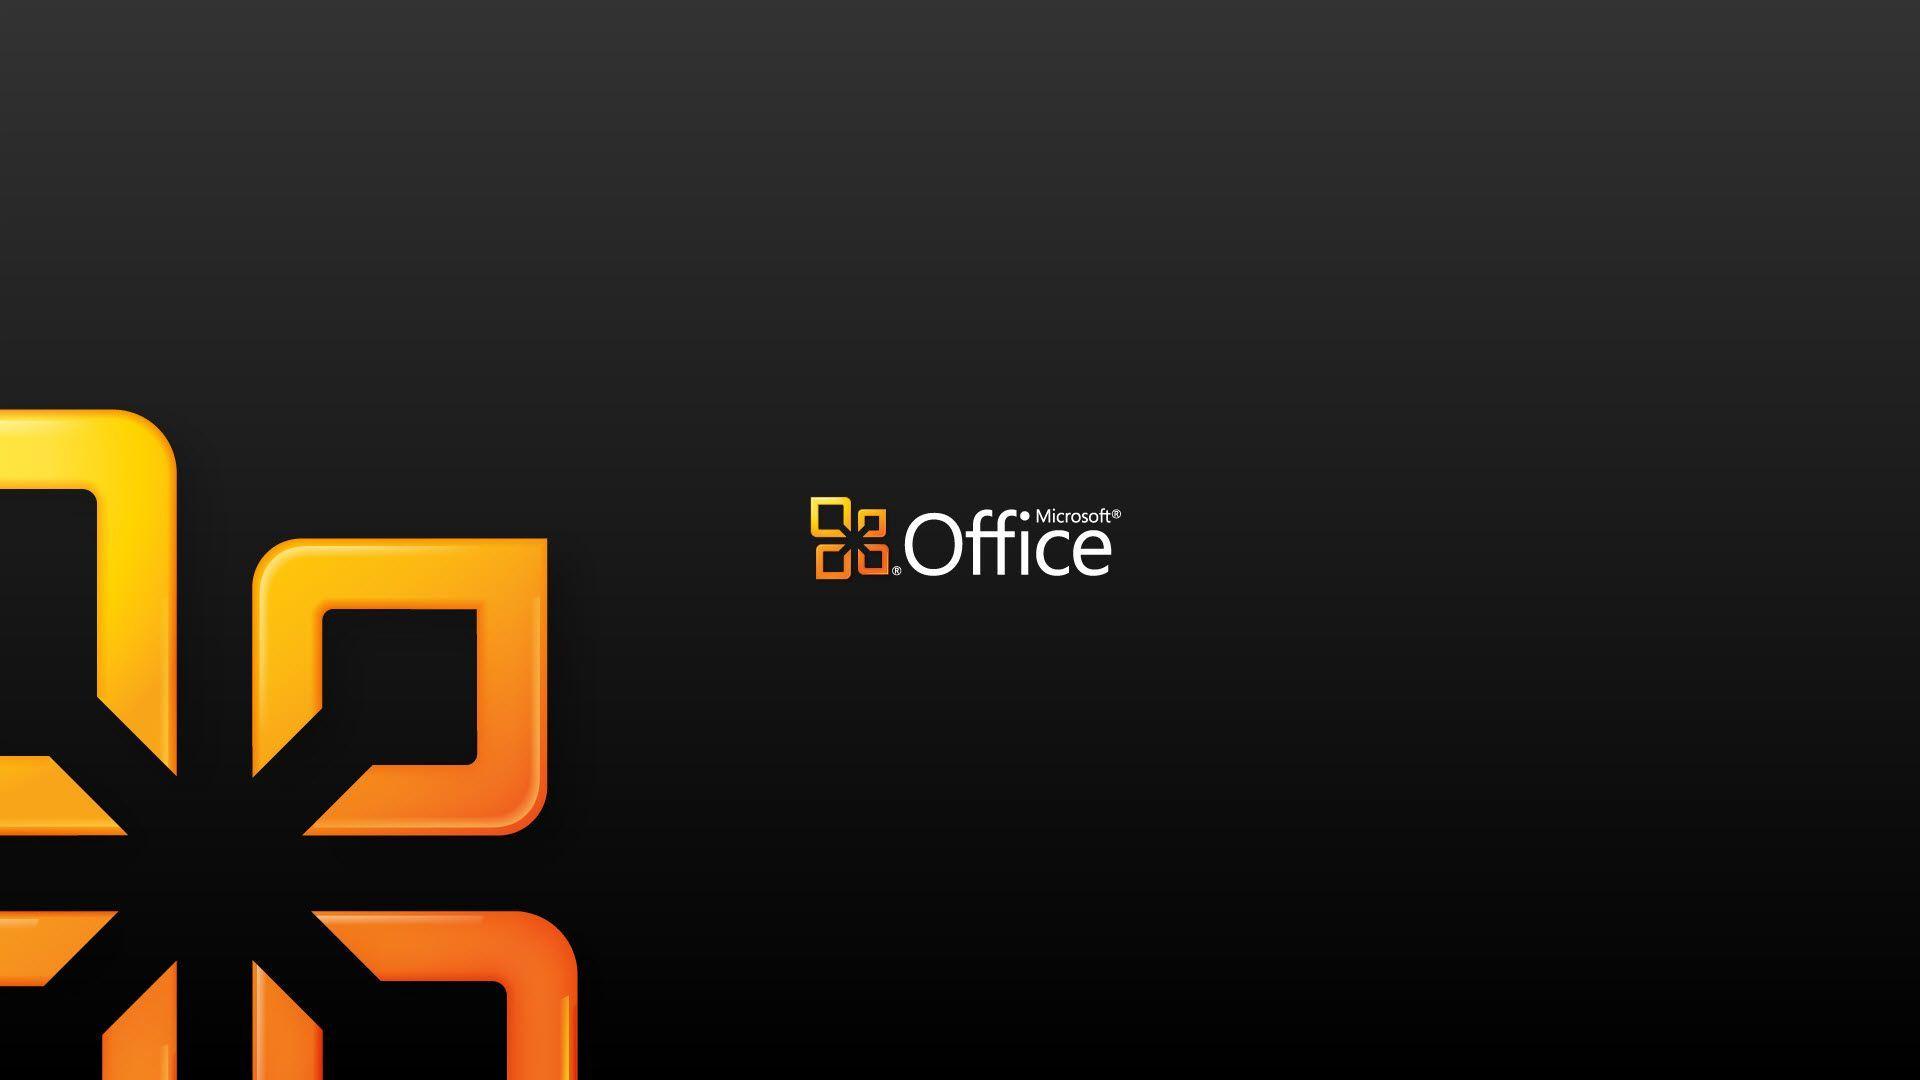 920x1080 hd office image for zoom background